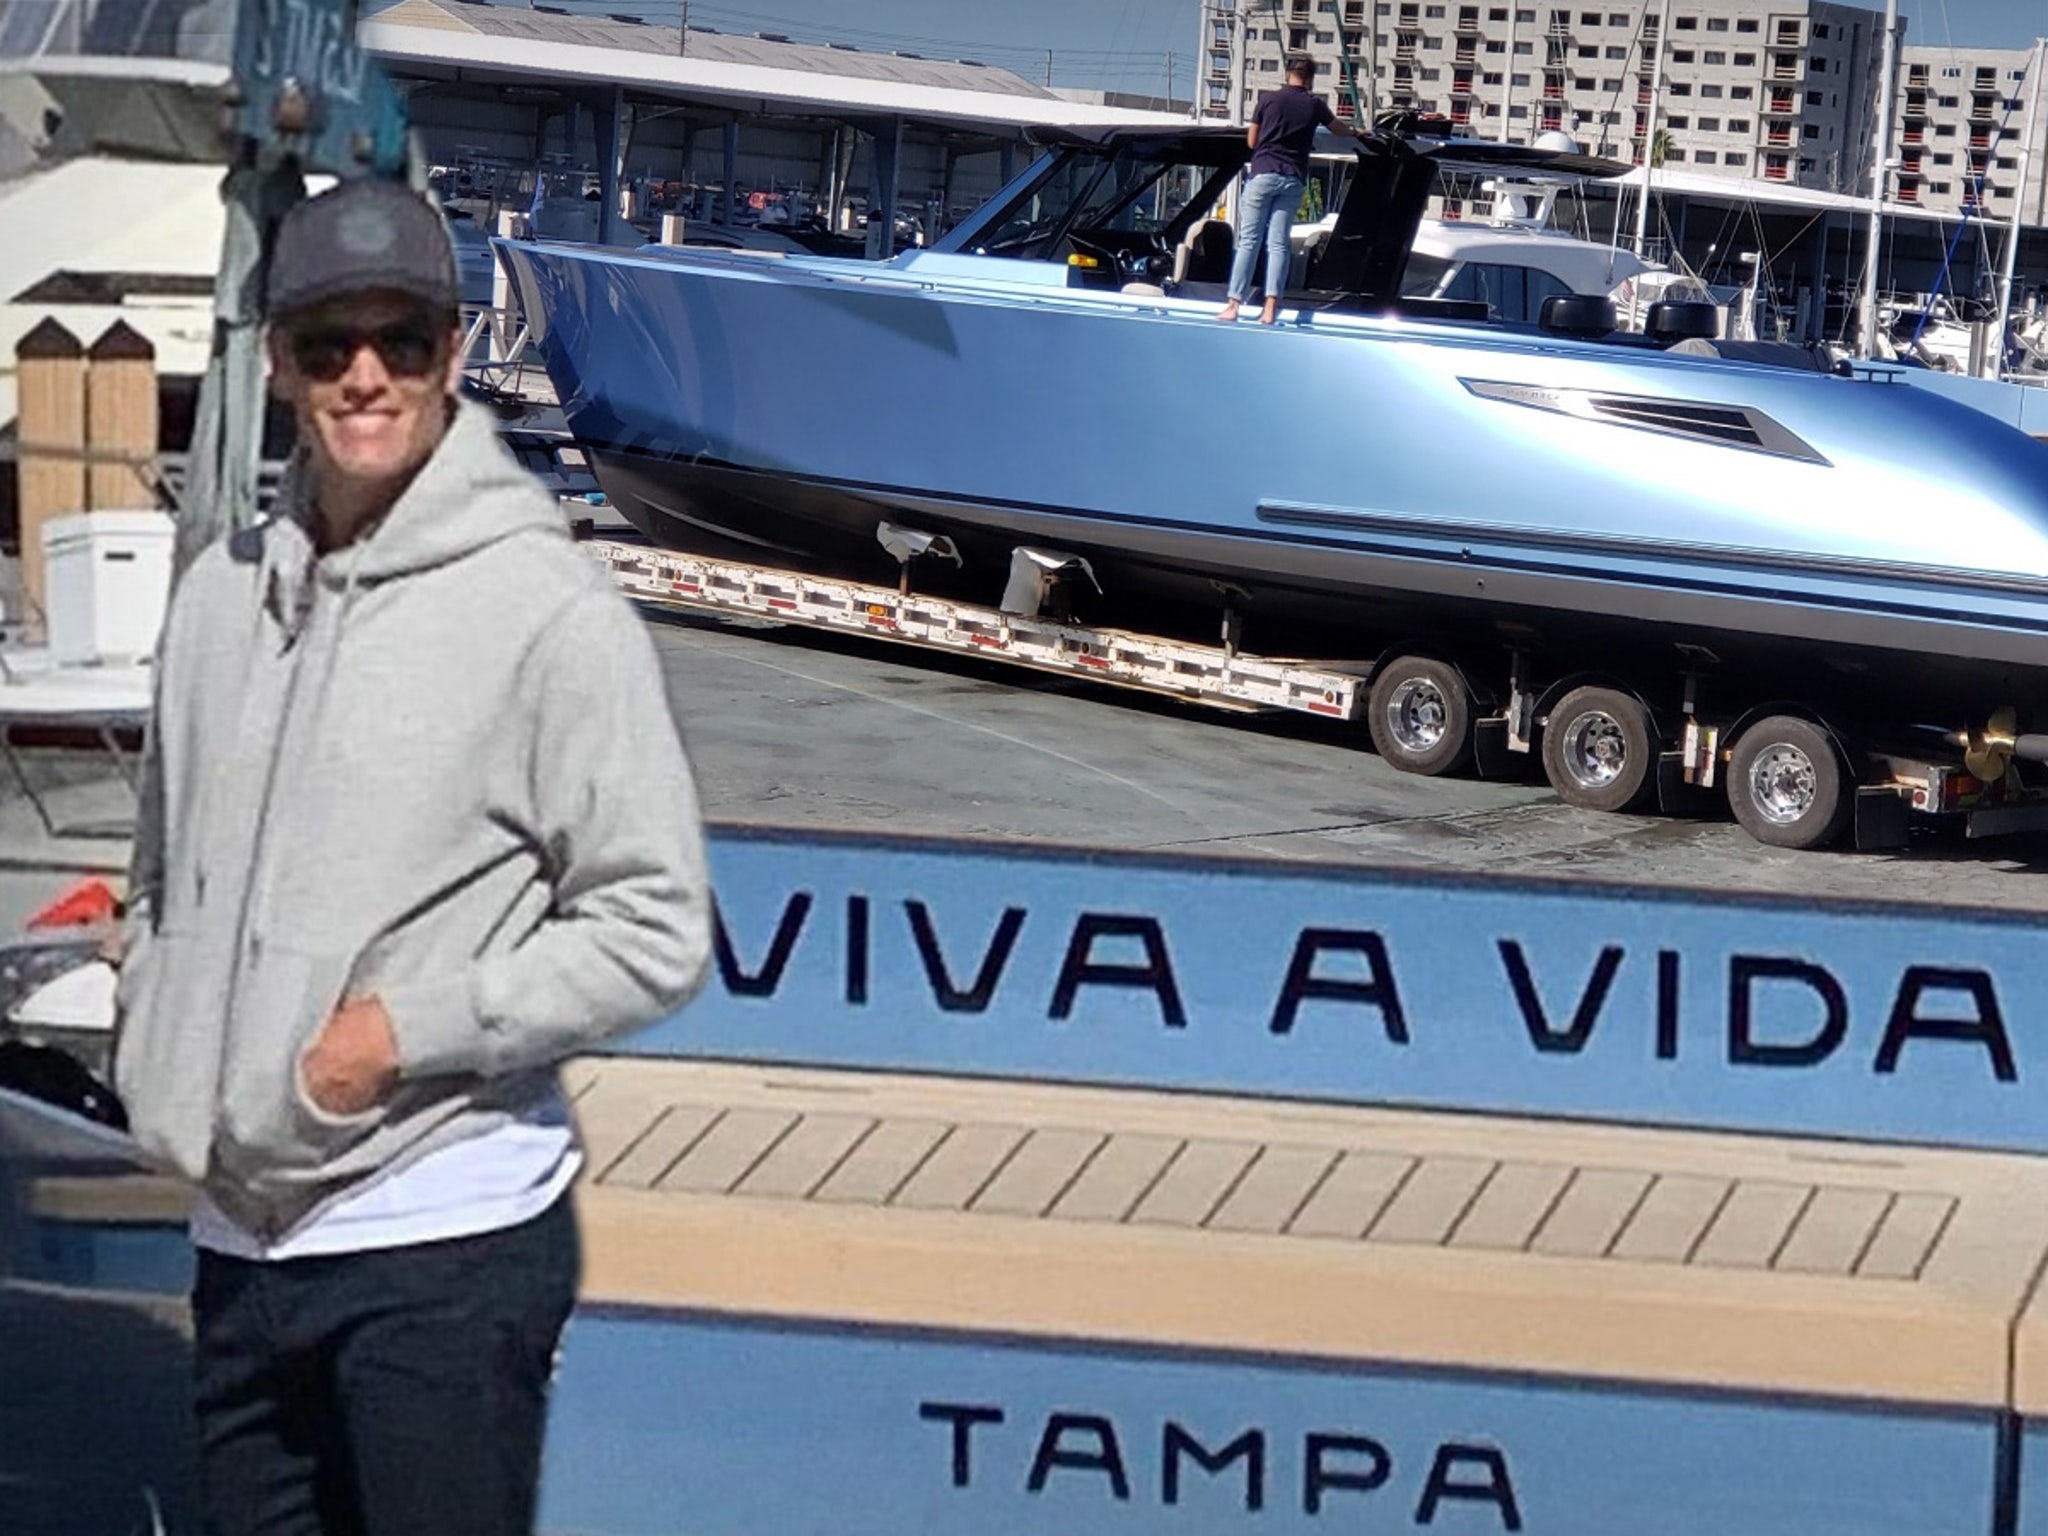 Tom Brady Takes Victory Lap in Stunning Yacht